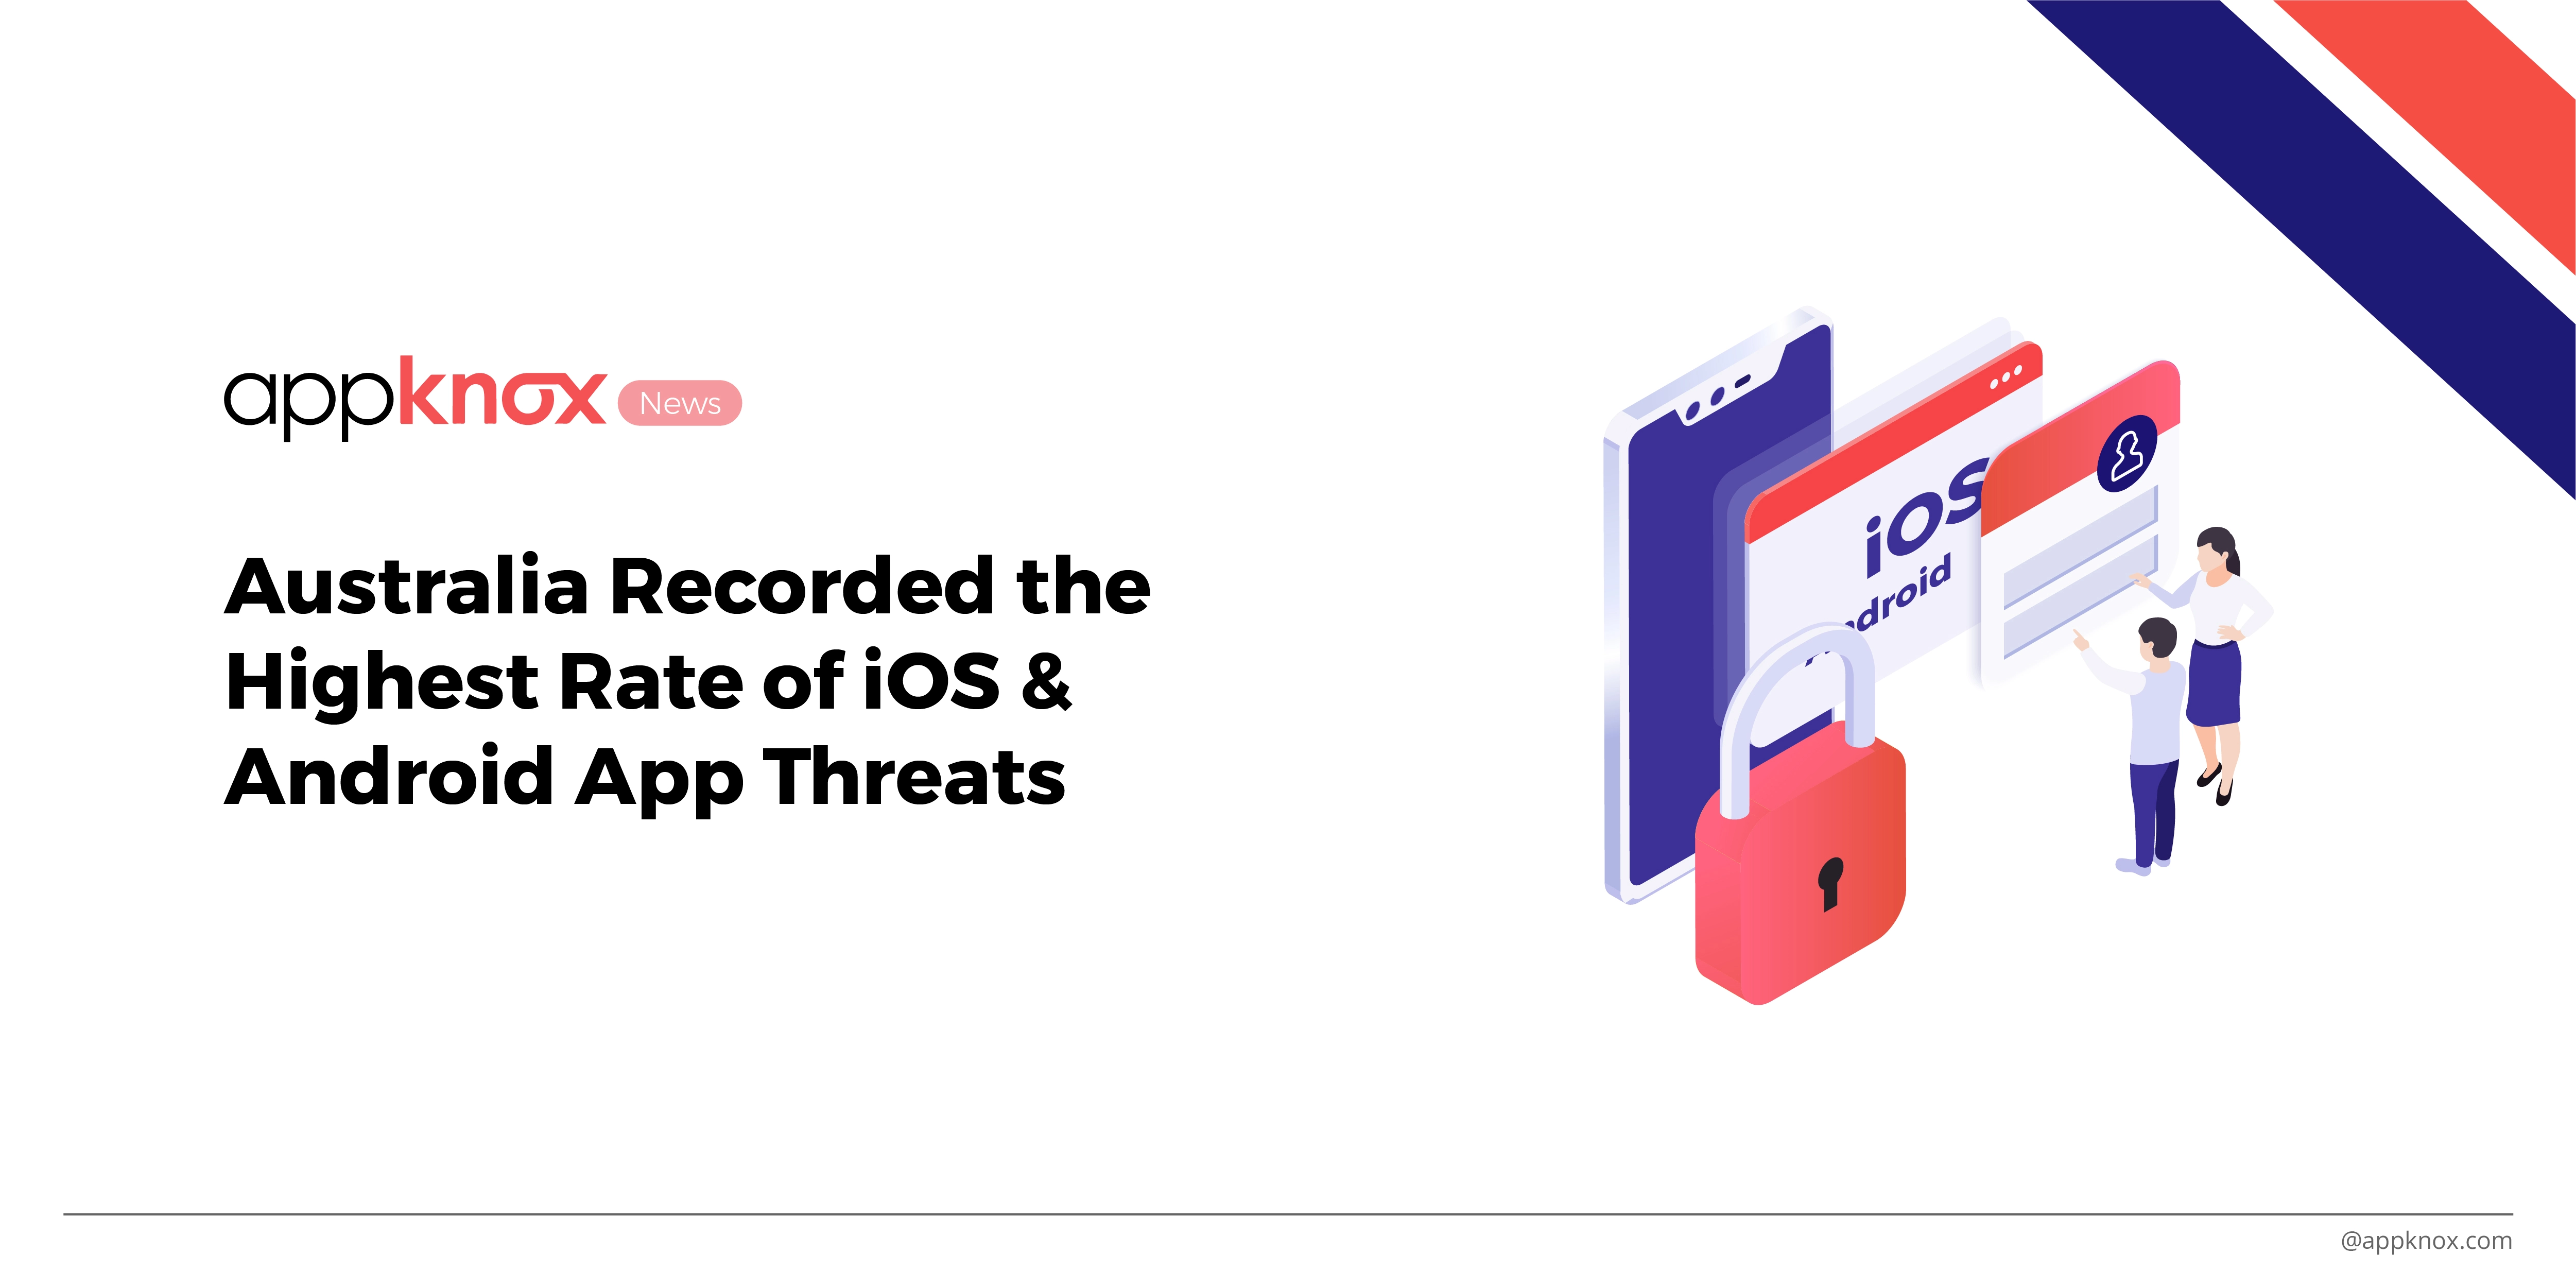 Australia Recorded the Highest Rate of iOS & Android App Threats